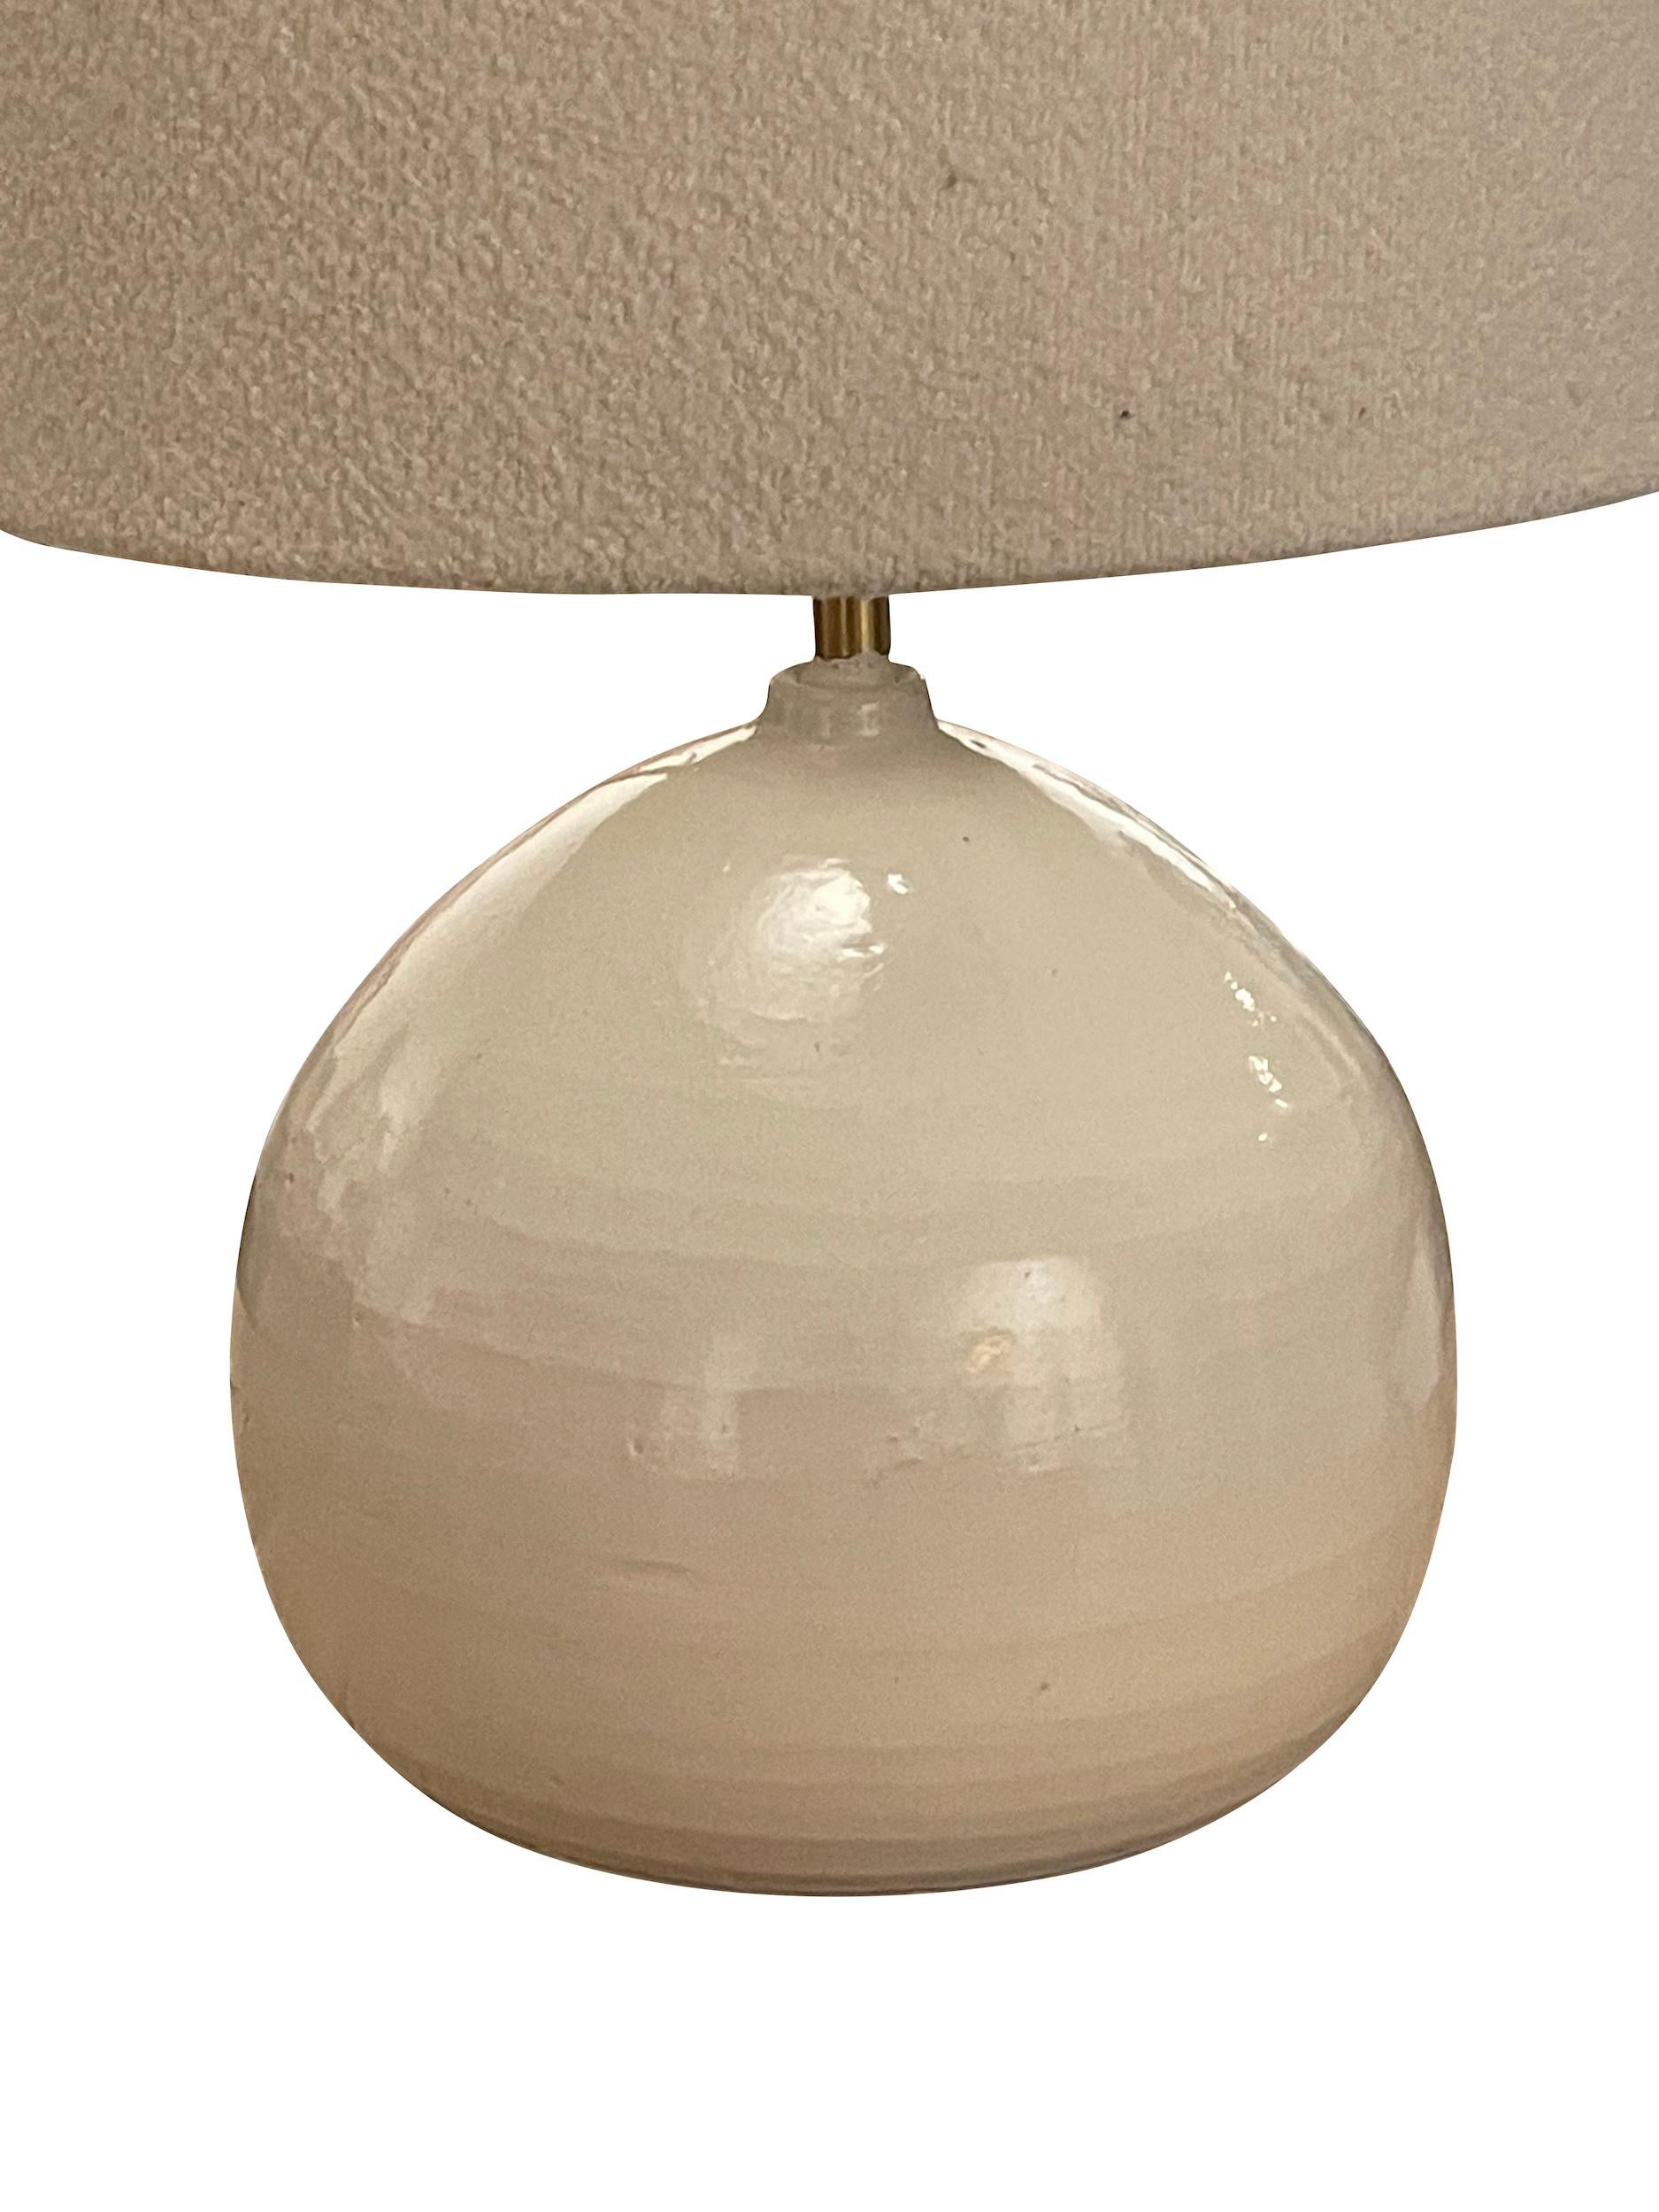 Contemporary Chinese pair of white squat shaped rounded base lamps.
Base measures 12